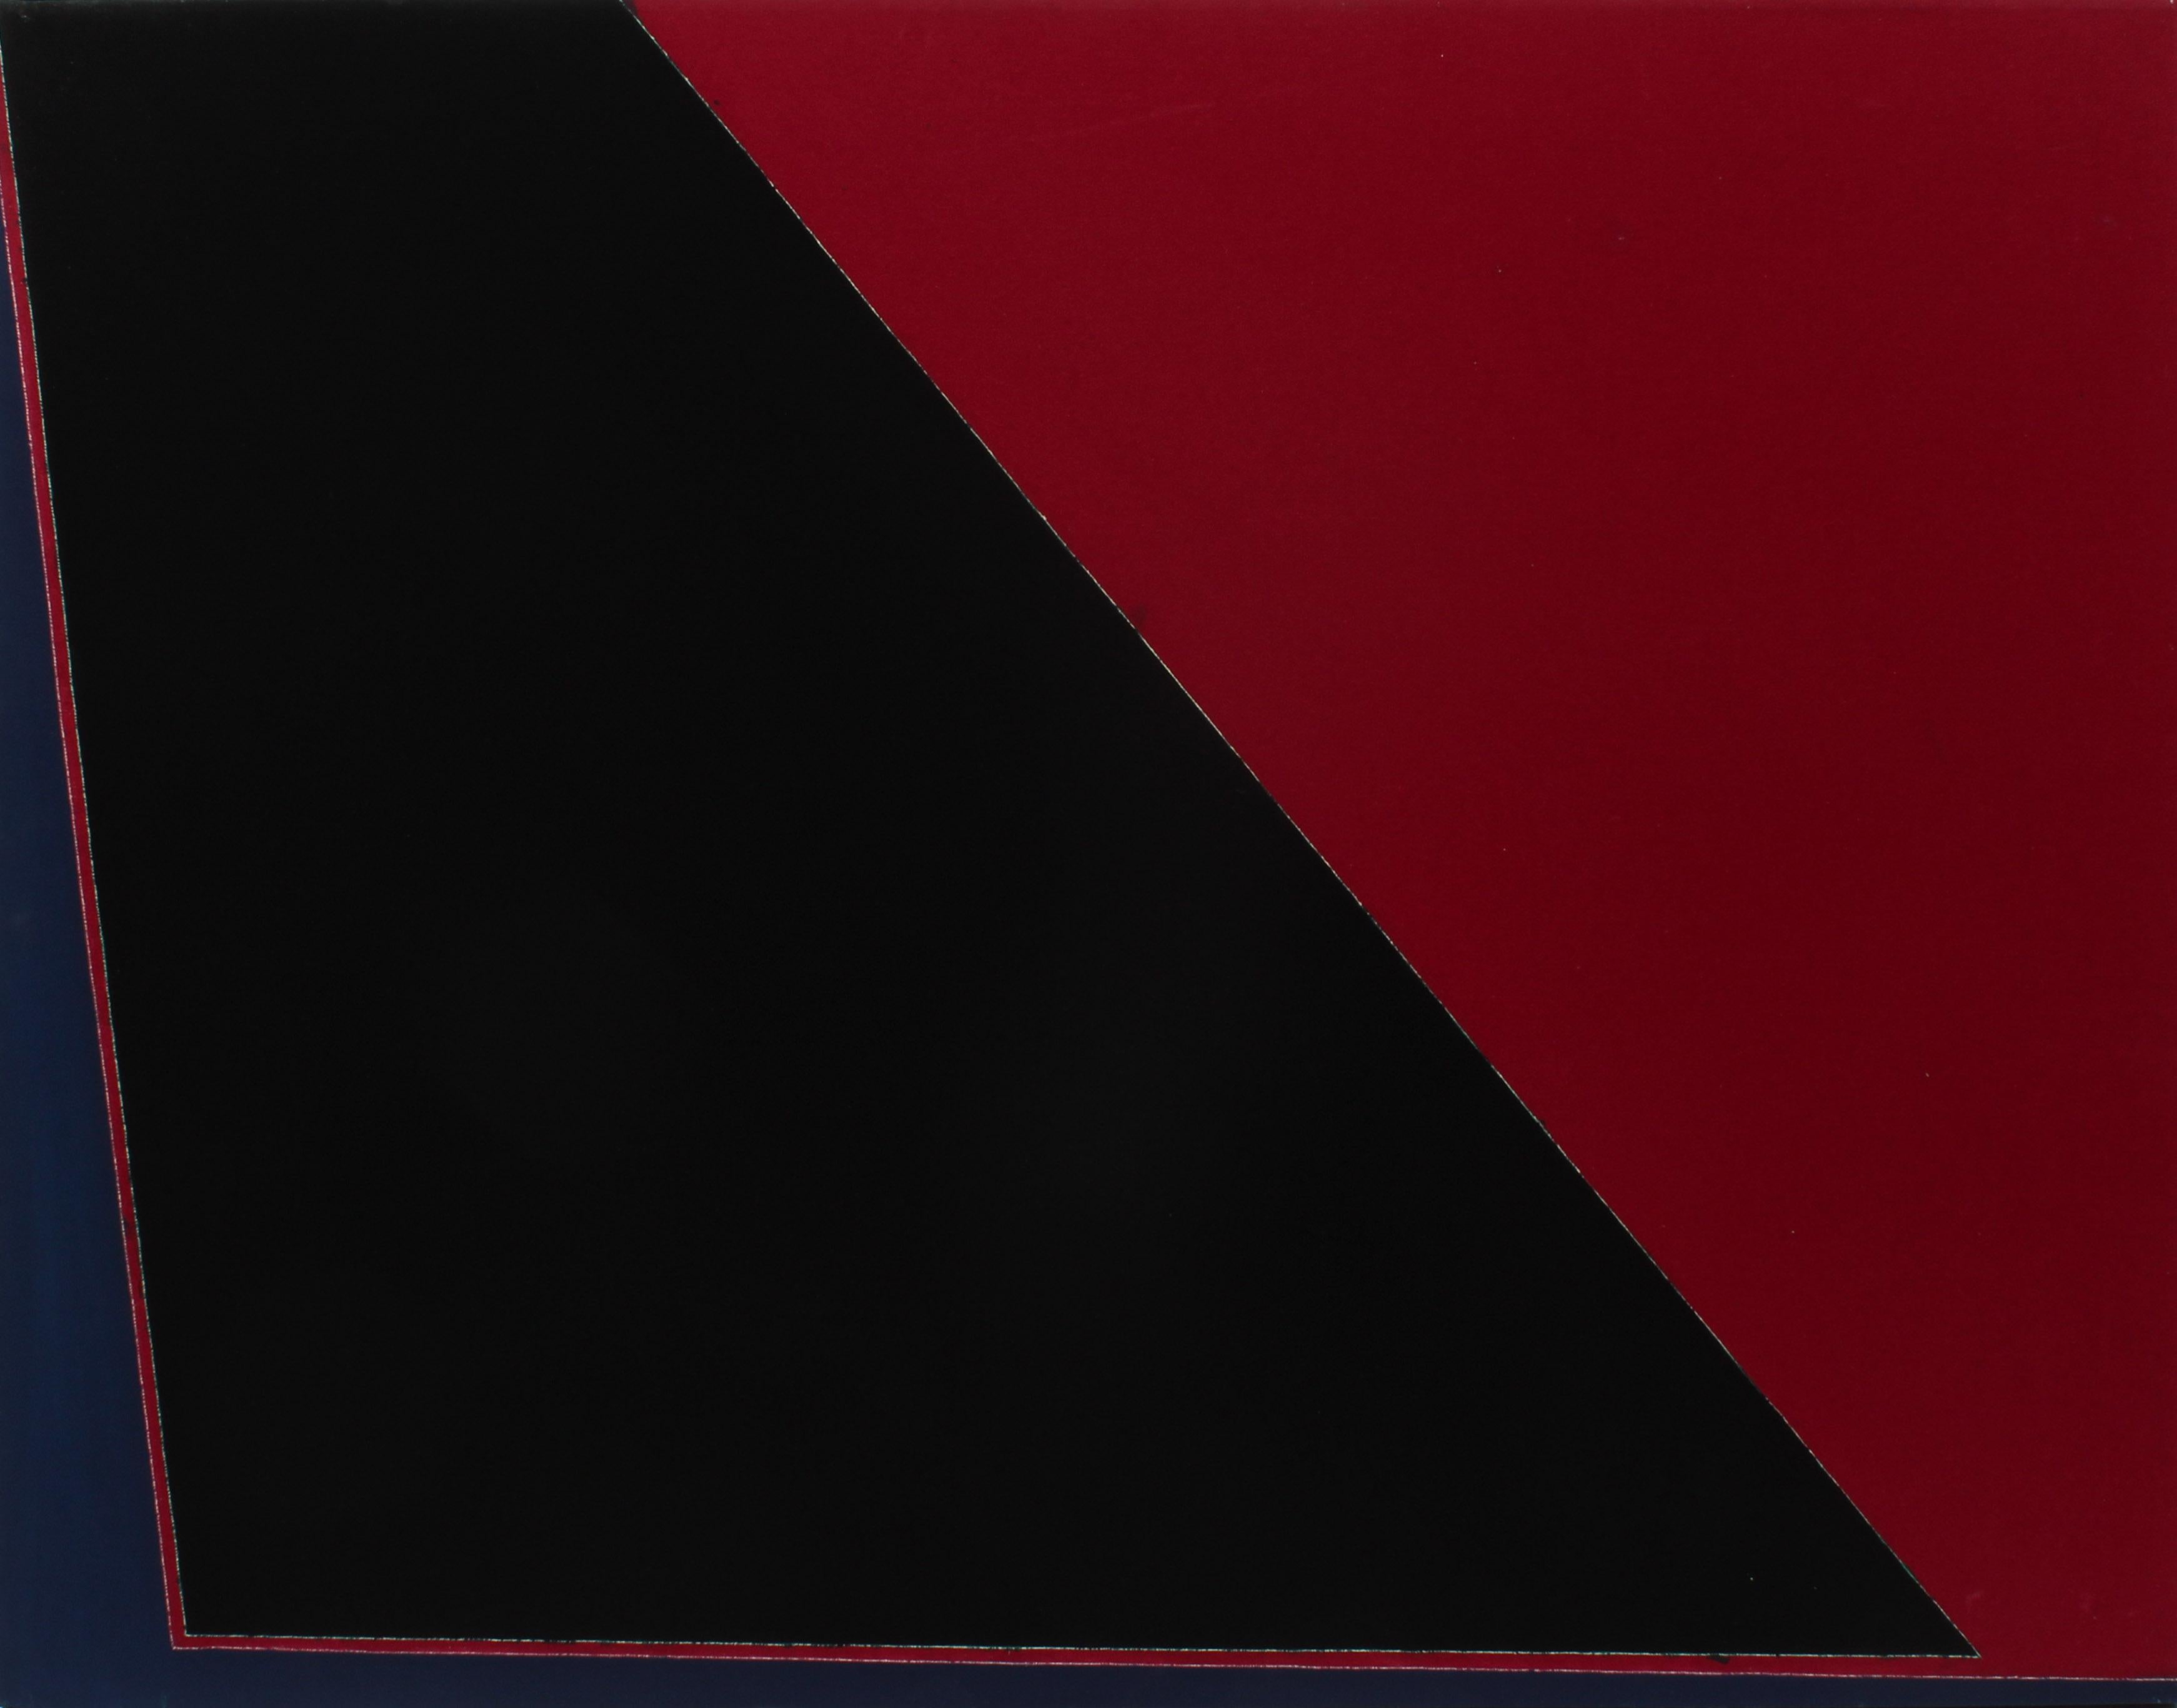 Martica Miguens Abstract Painting - Minimalist Painting New York American Artist Female Blue Black Deep Red 1974 